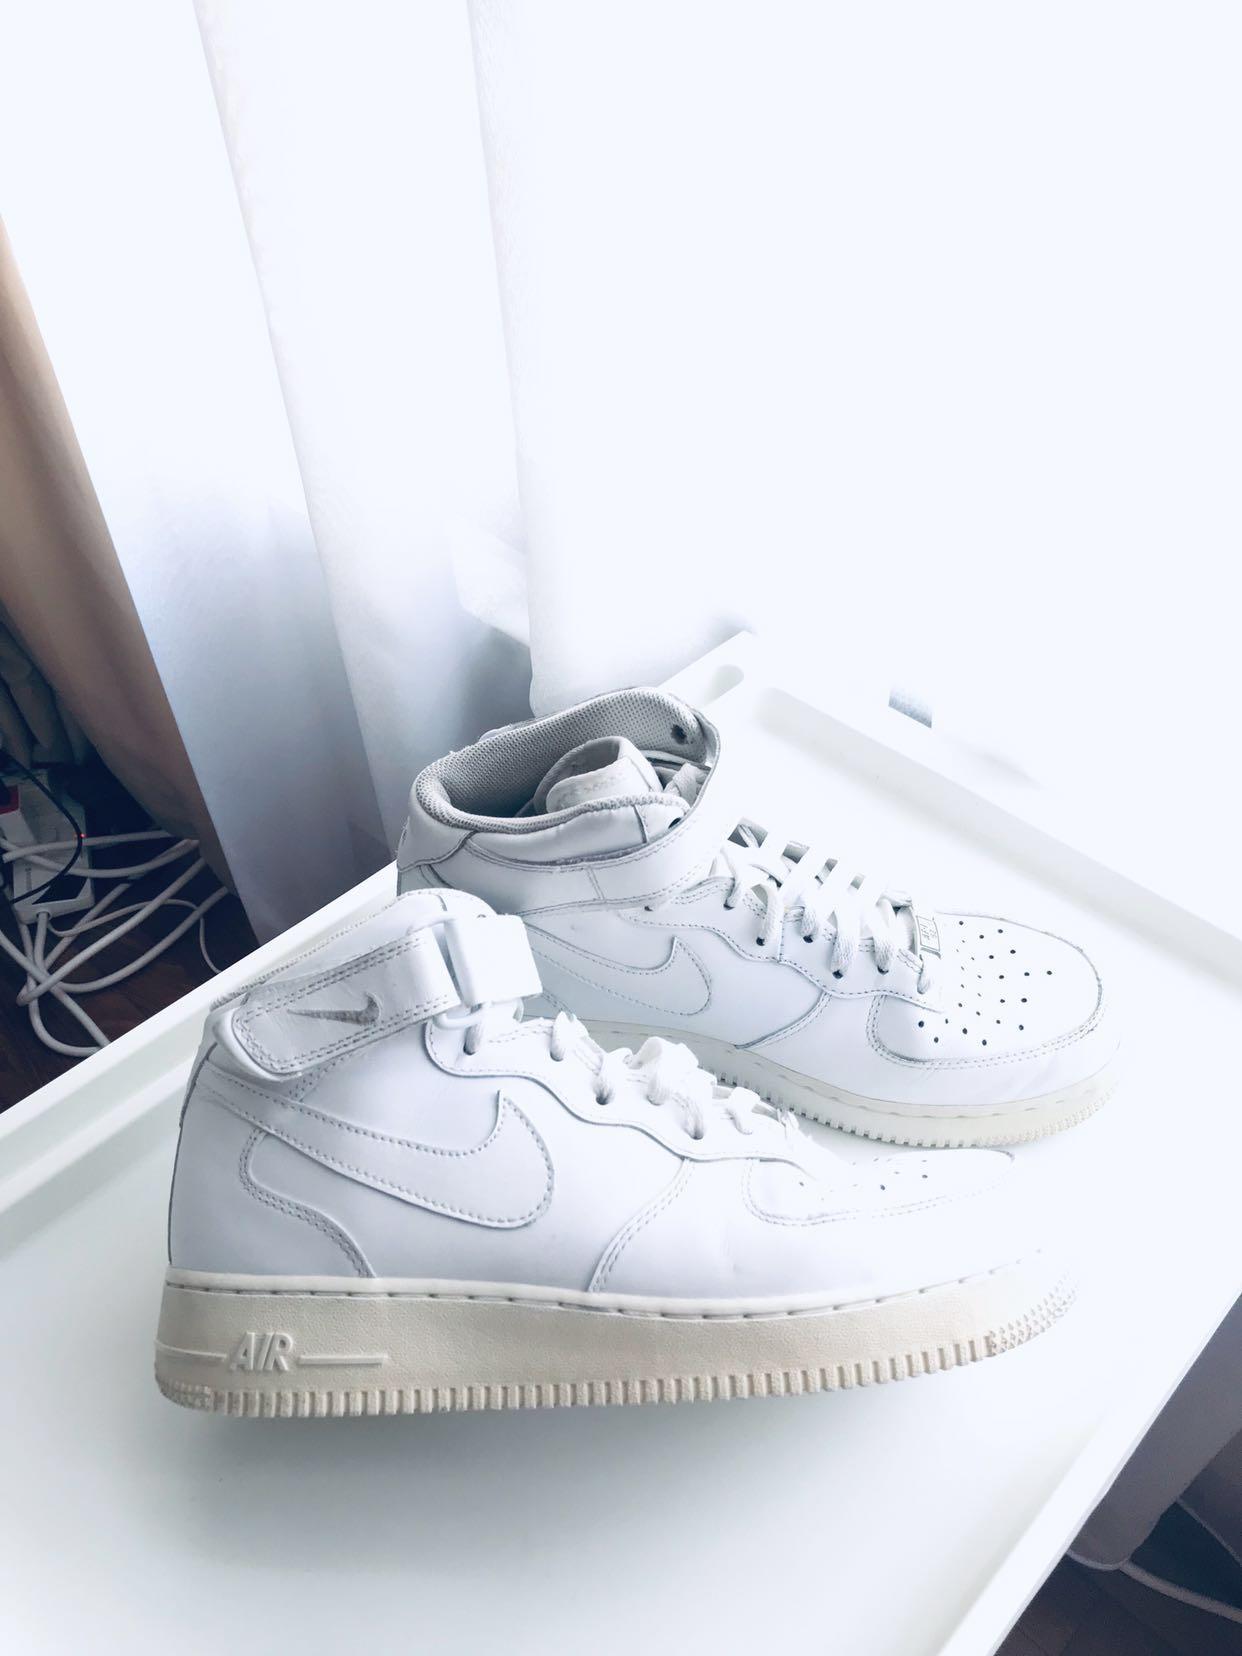 Classic Nike Airforce One High Top AF-1 82 XXV, Men's Fashion, Footwear, Sneakers Carousell